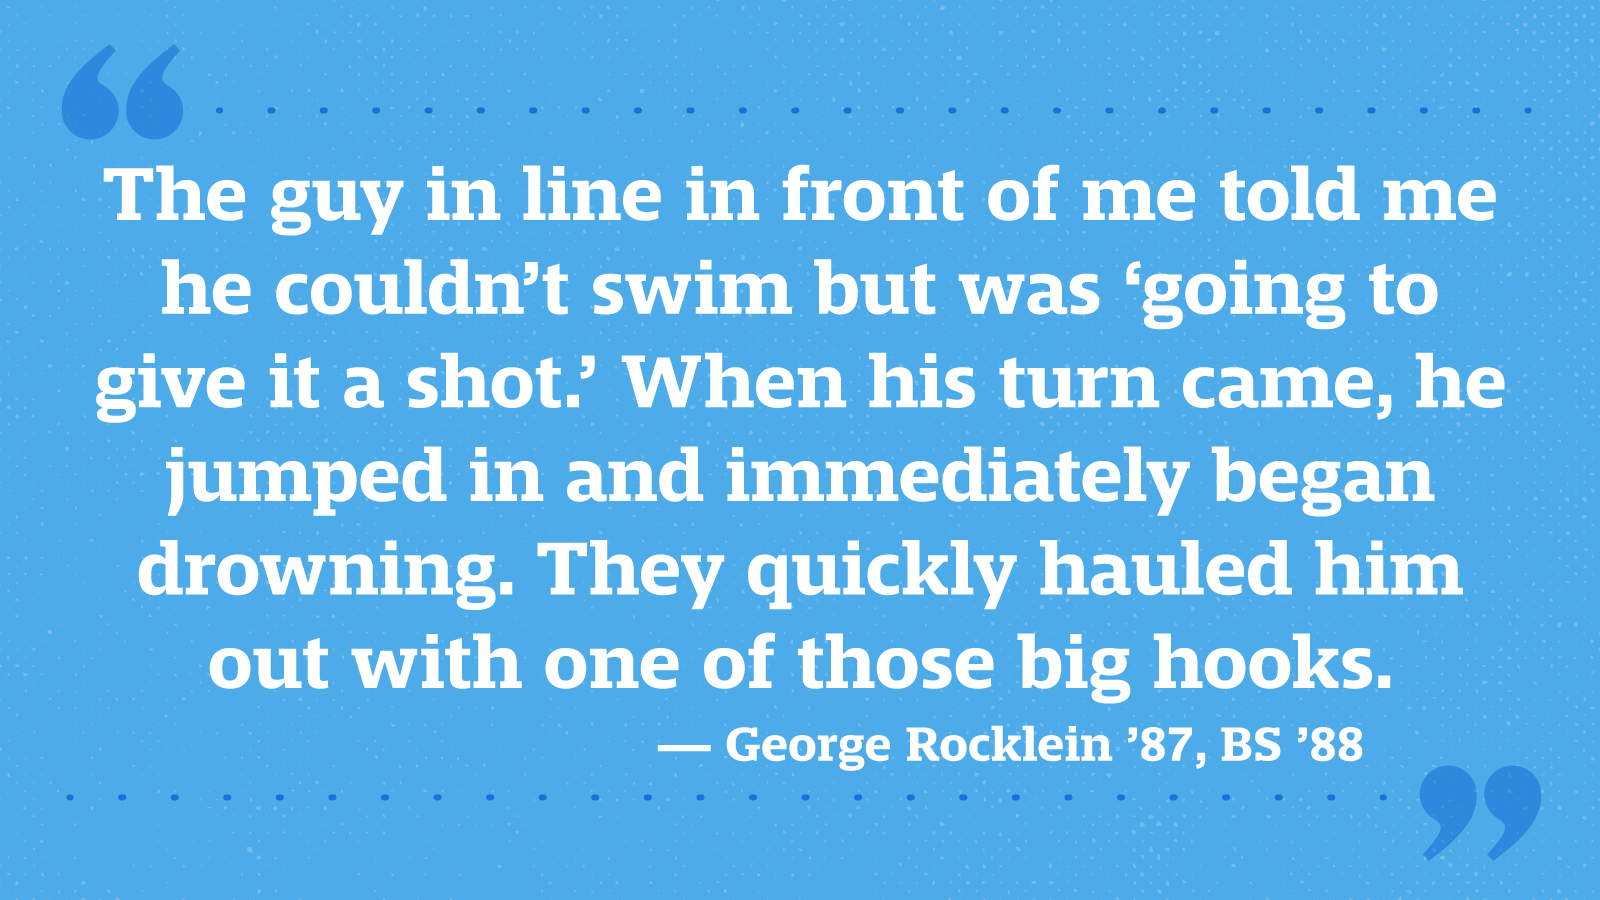 The guy in line in front of me told me he couldn’t swim but was ‘going to give it a shot.’ When his turn came, he jumped in and immediately began drowning. They quickly hauled him out with one of those big hooks. — George Rocklein ’87, BS ’88